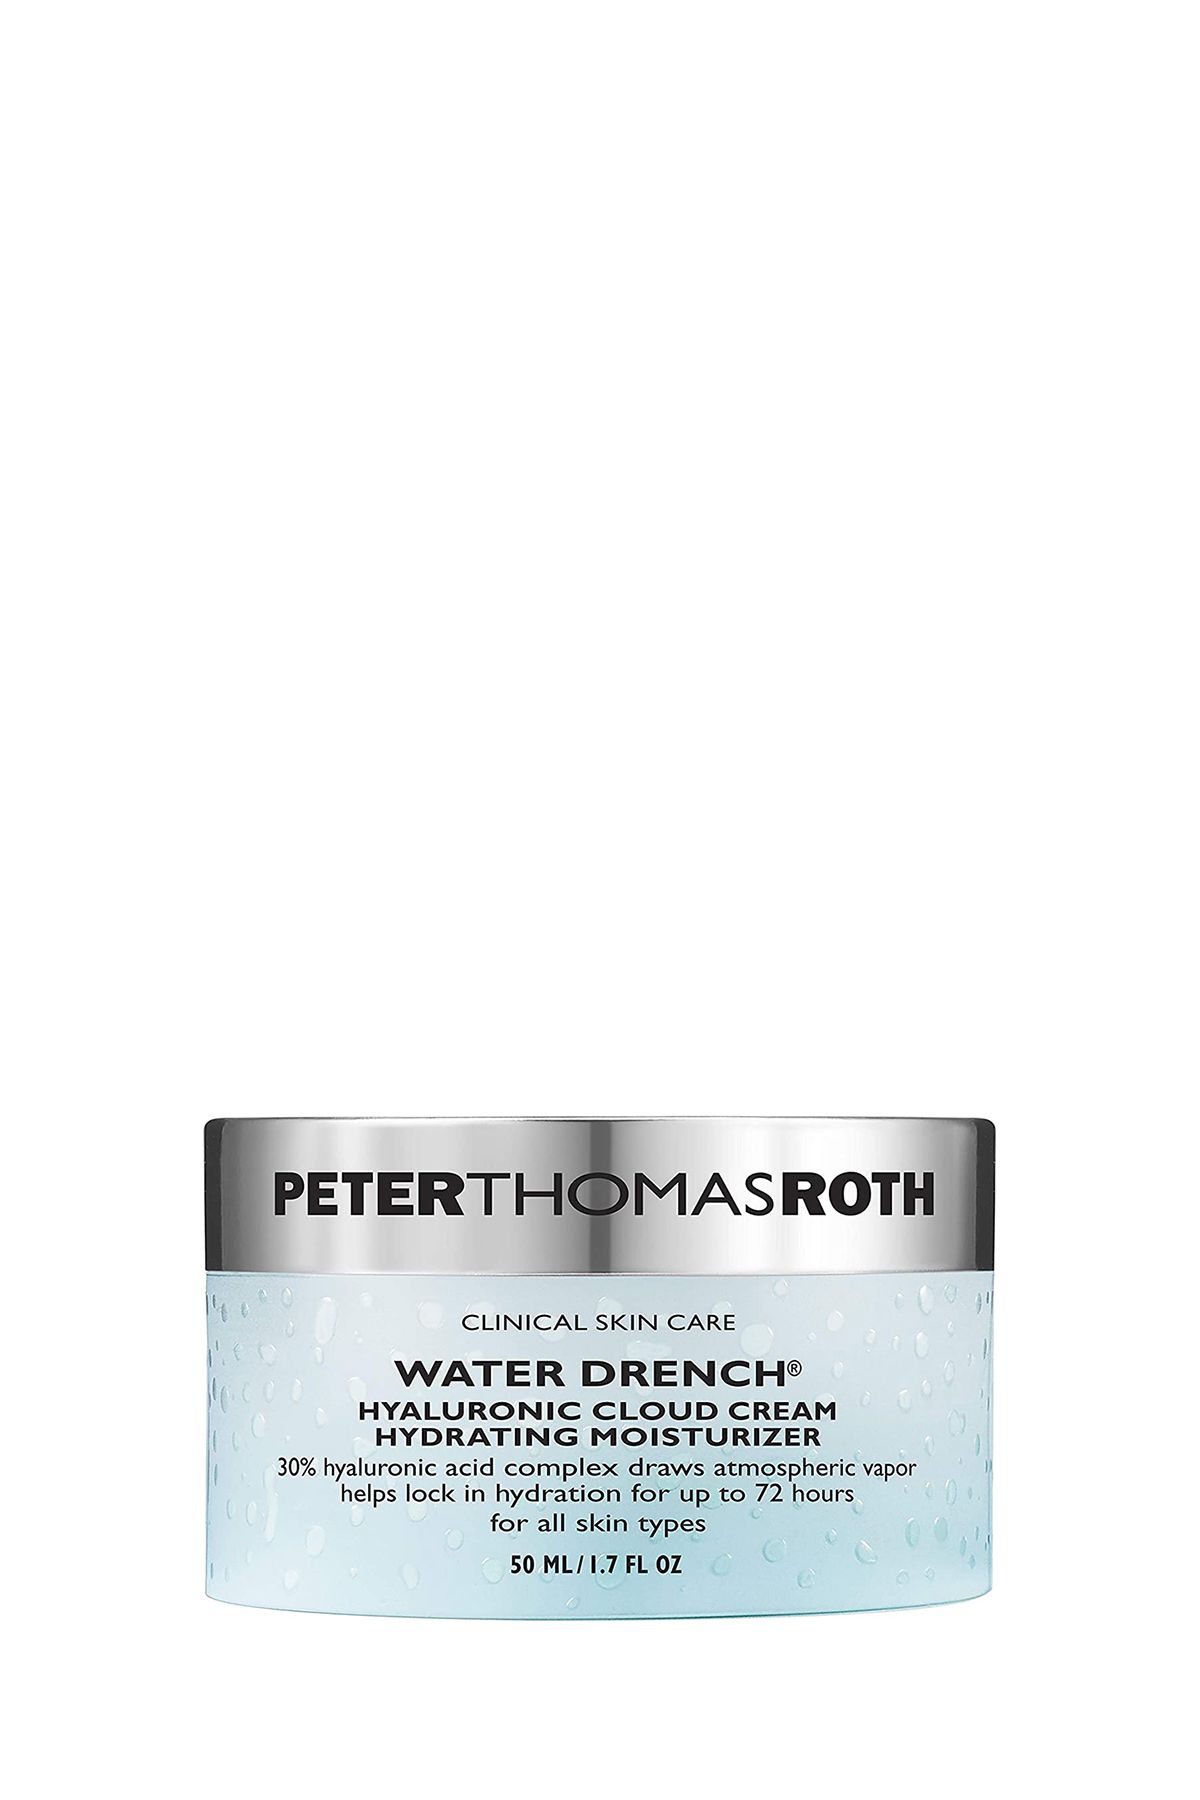 PETER THOMAS ROTH Water Drench Hyaluronic Cloud Cream Hydrating Moisturizer 50 ml